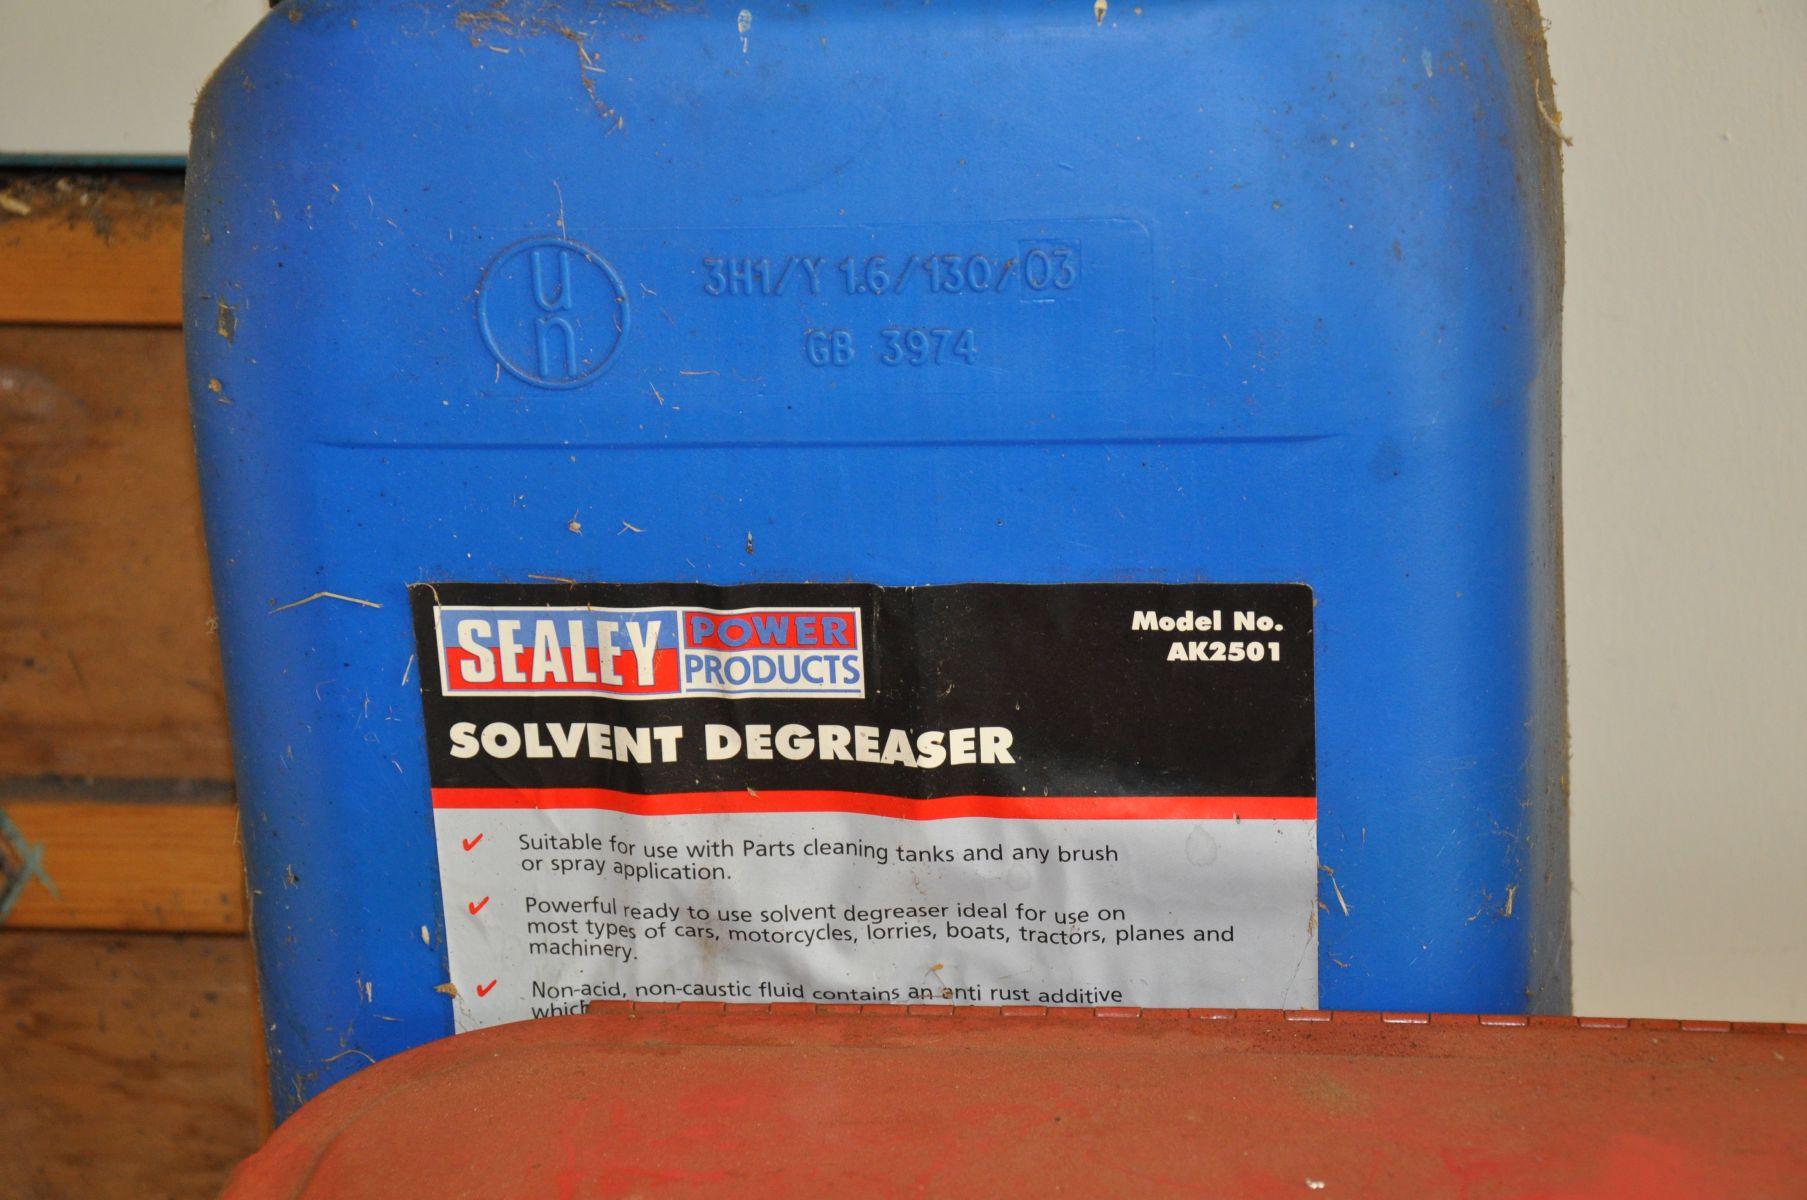 A SEALEY 5M-21C PARTS DEGREASER, and a part tub of Sealer Degreasing Solvent (2) 44cm wide x 34cm - Image 3 of 3